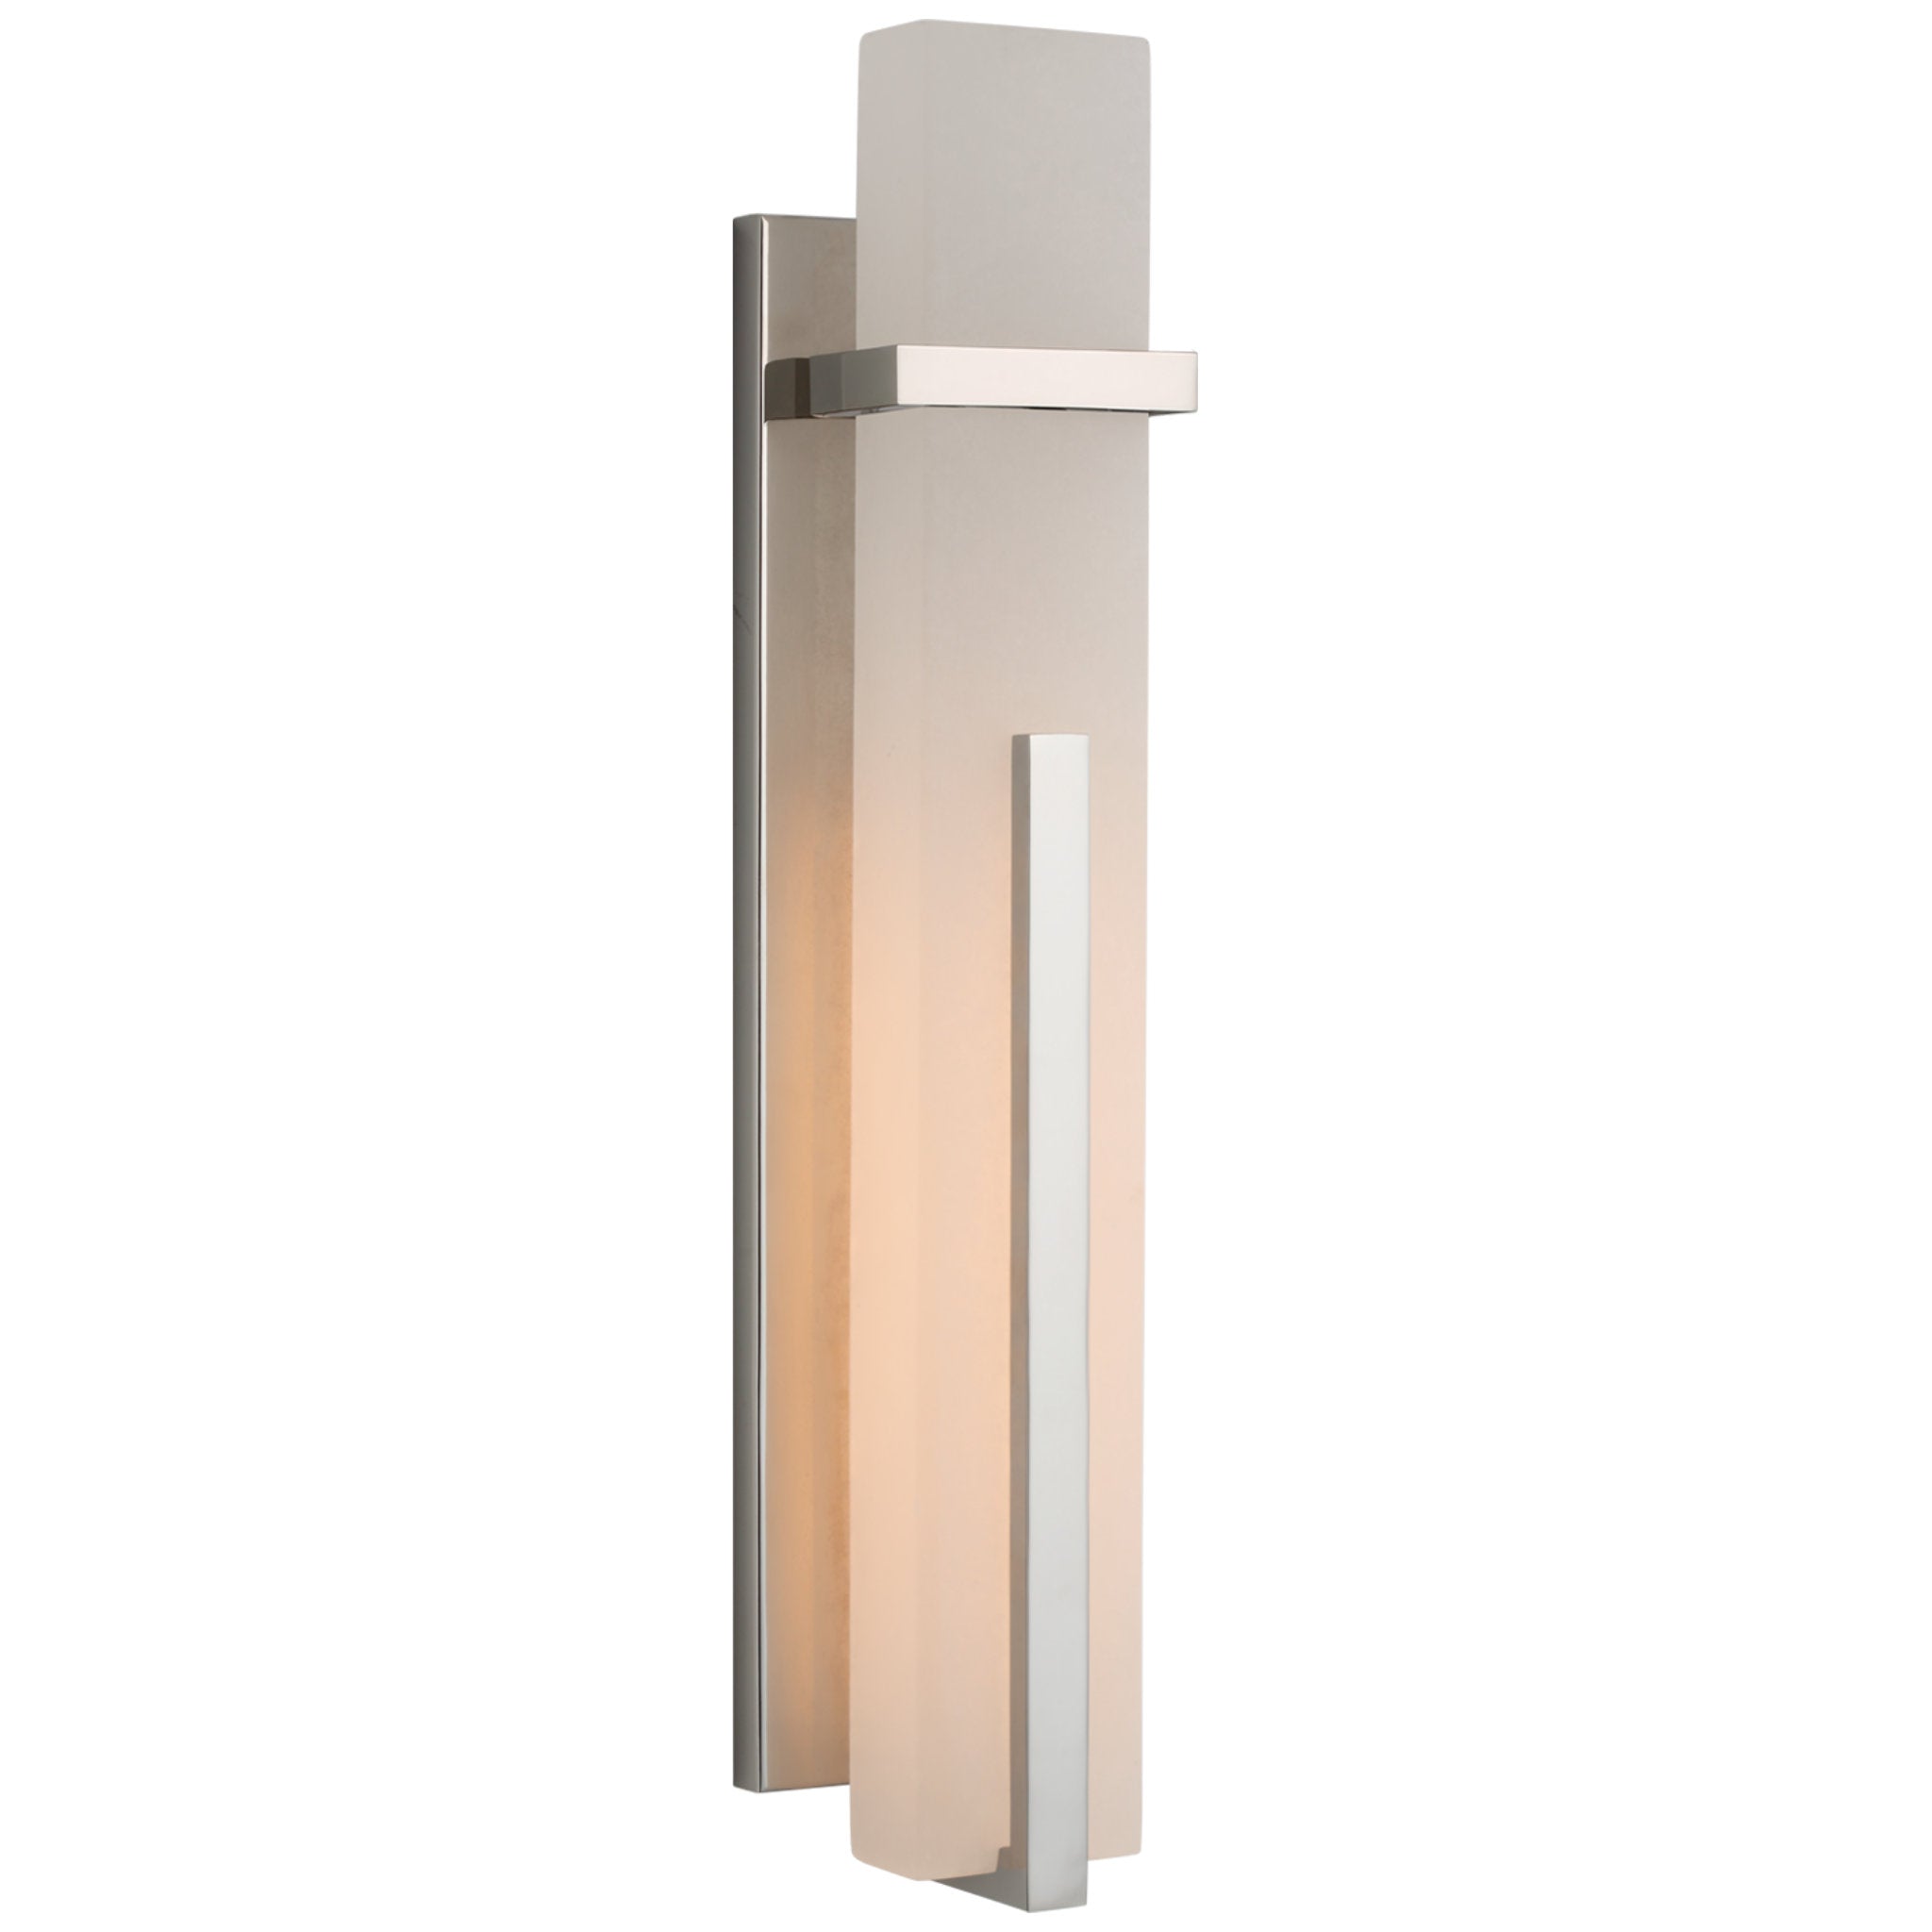 Ian K. Fowler Malik Large Sconce in Polished Nickel with Alabaster